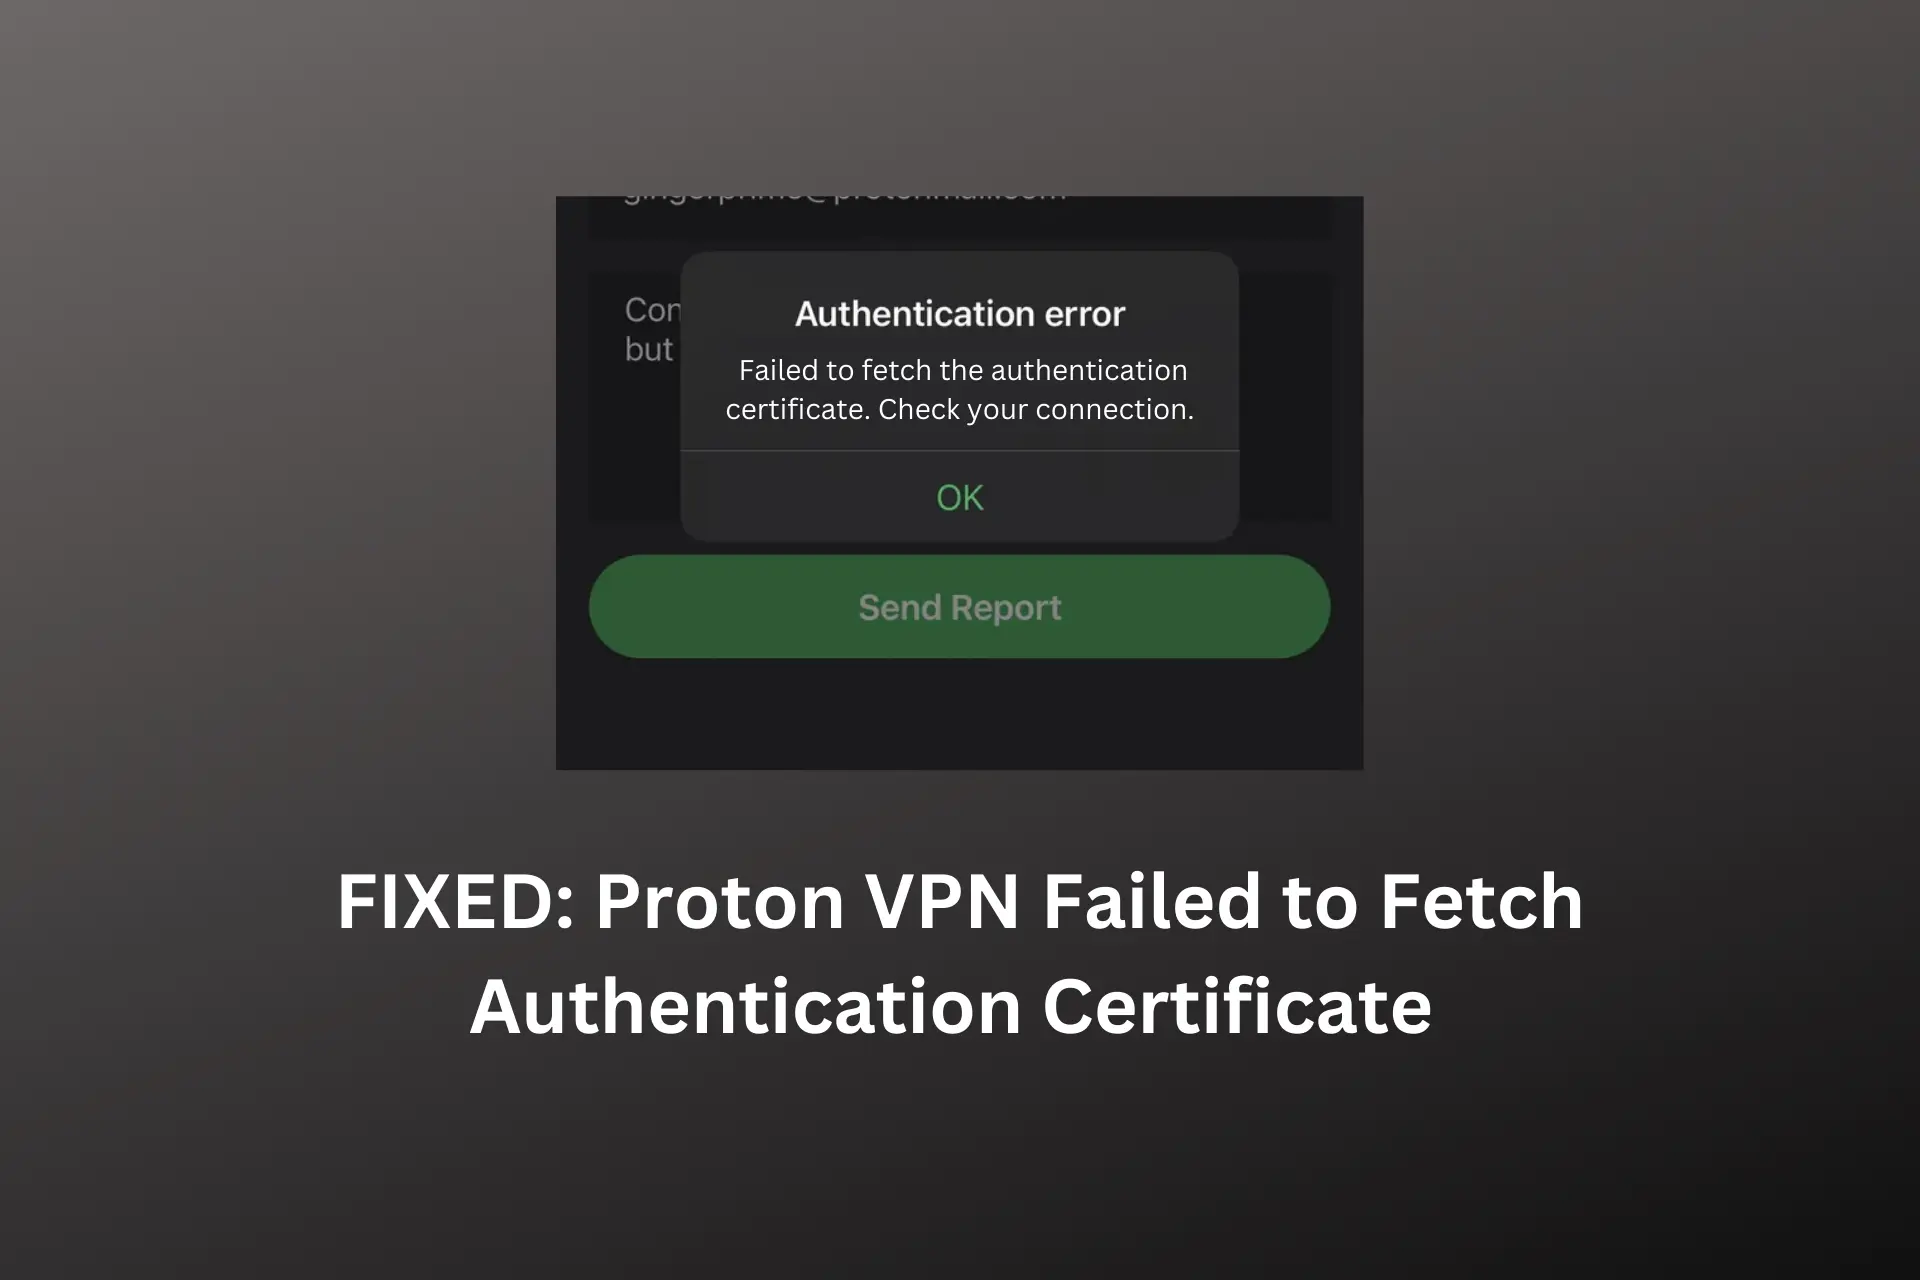 proton vpn Failed to fetch authentication certificate